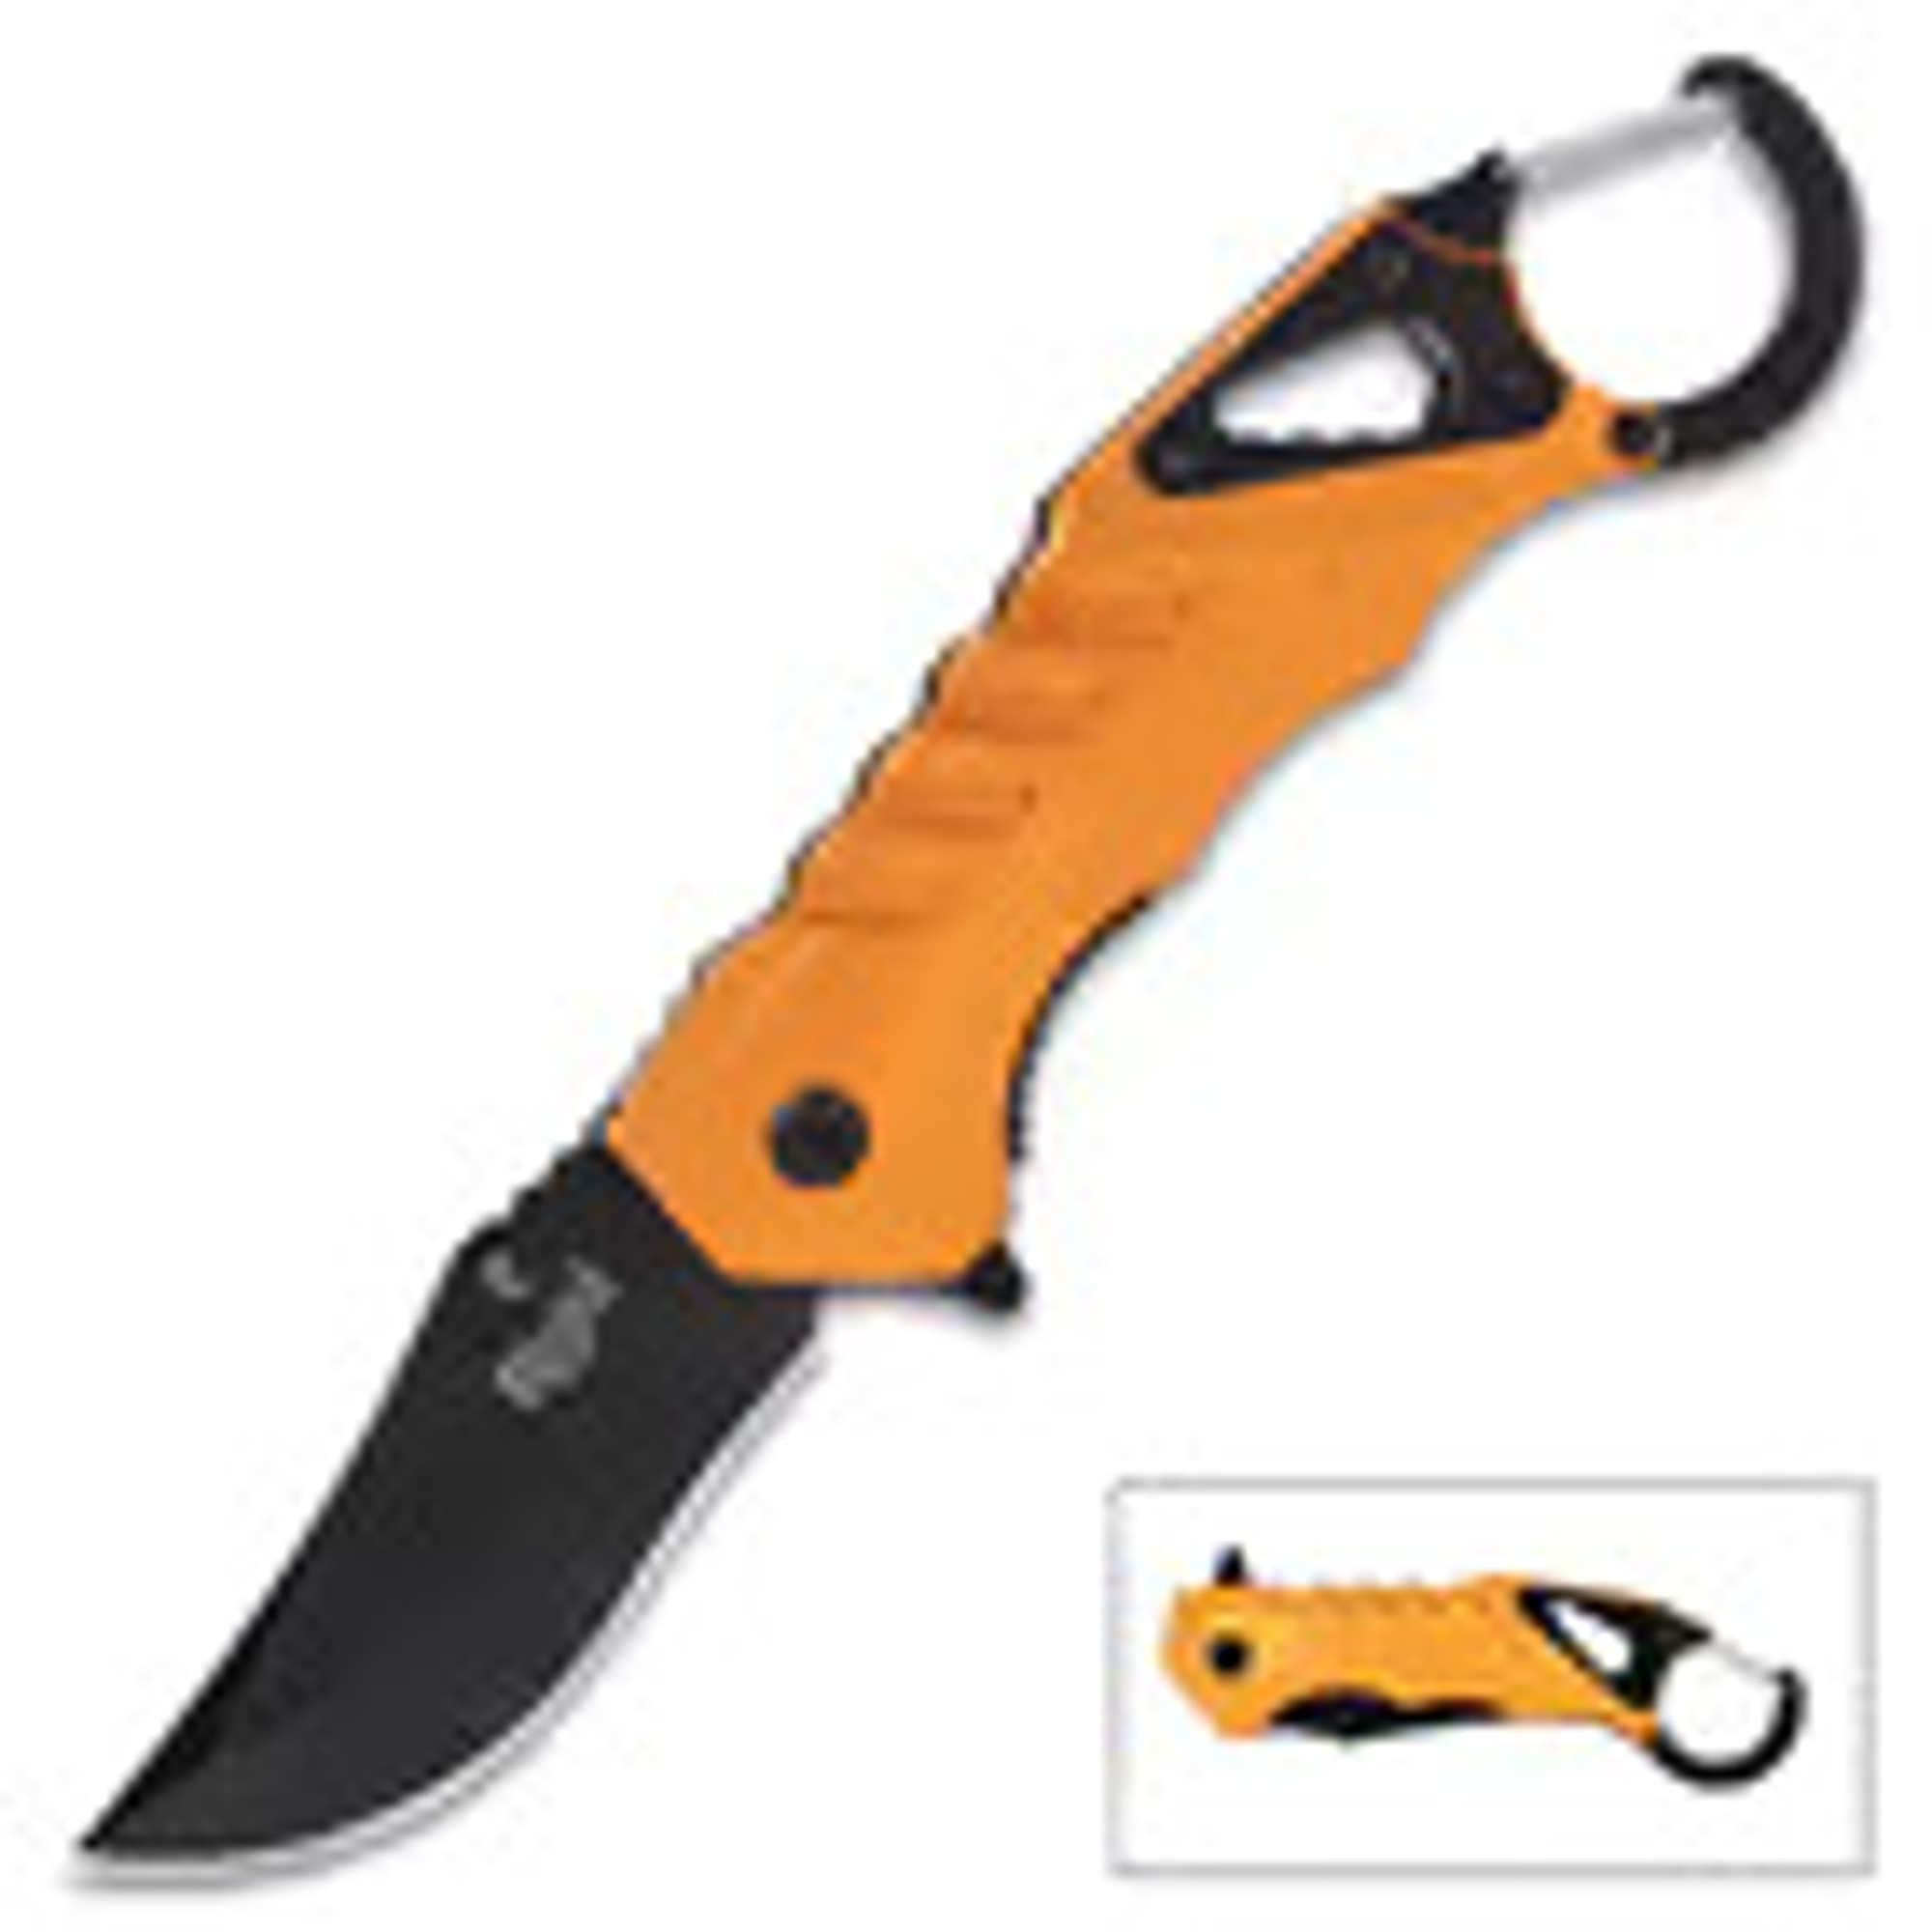 Rigid Multi-Function Knife With Carabiner Clip